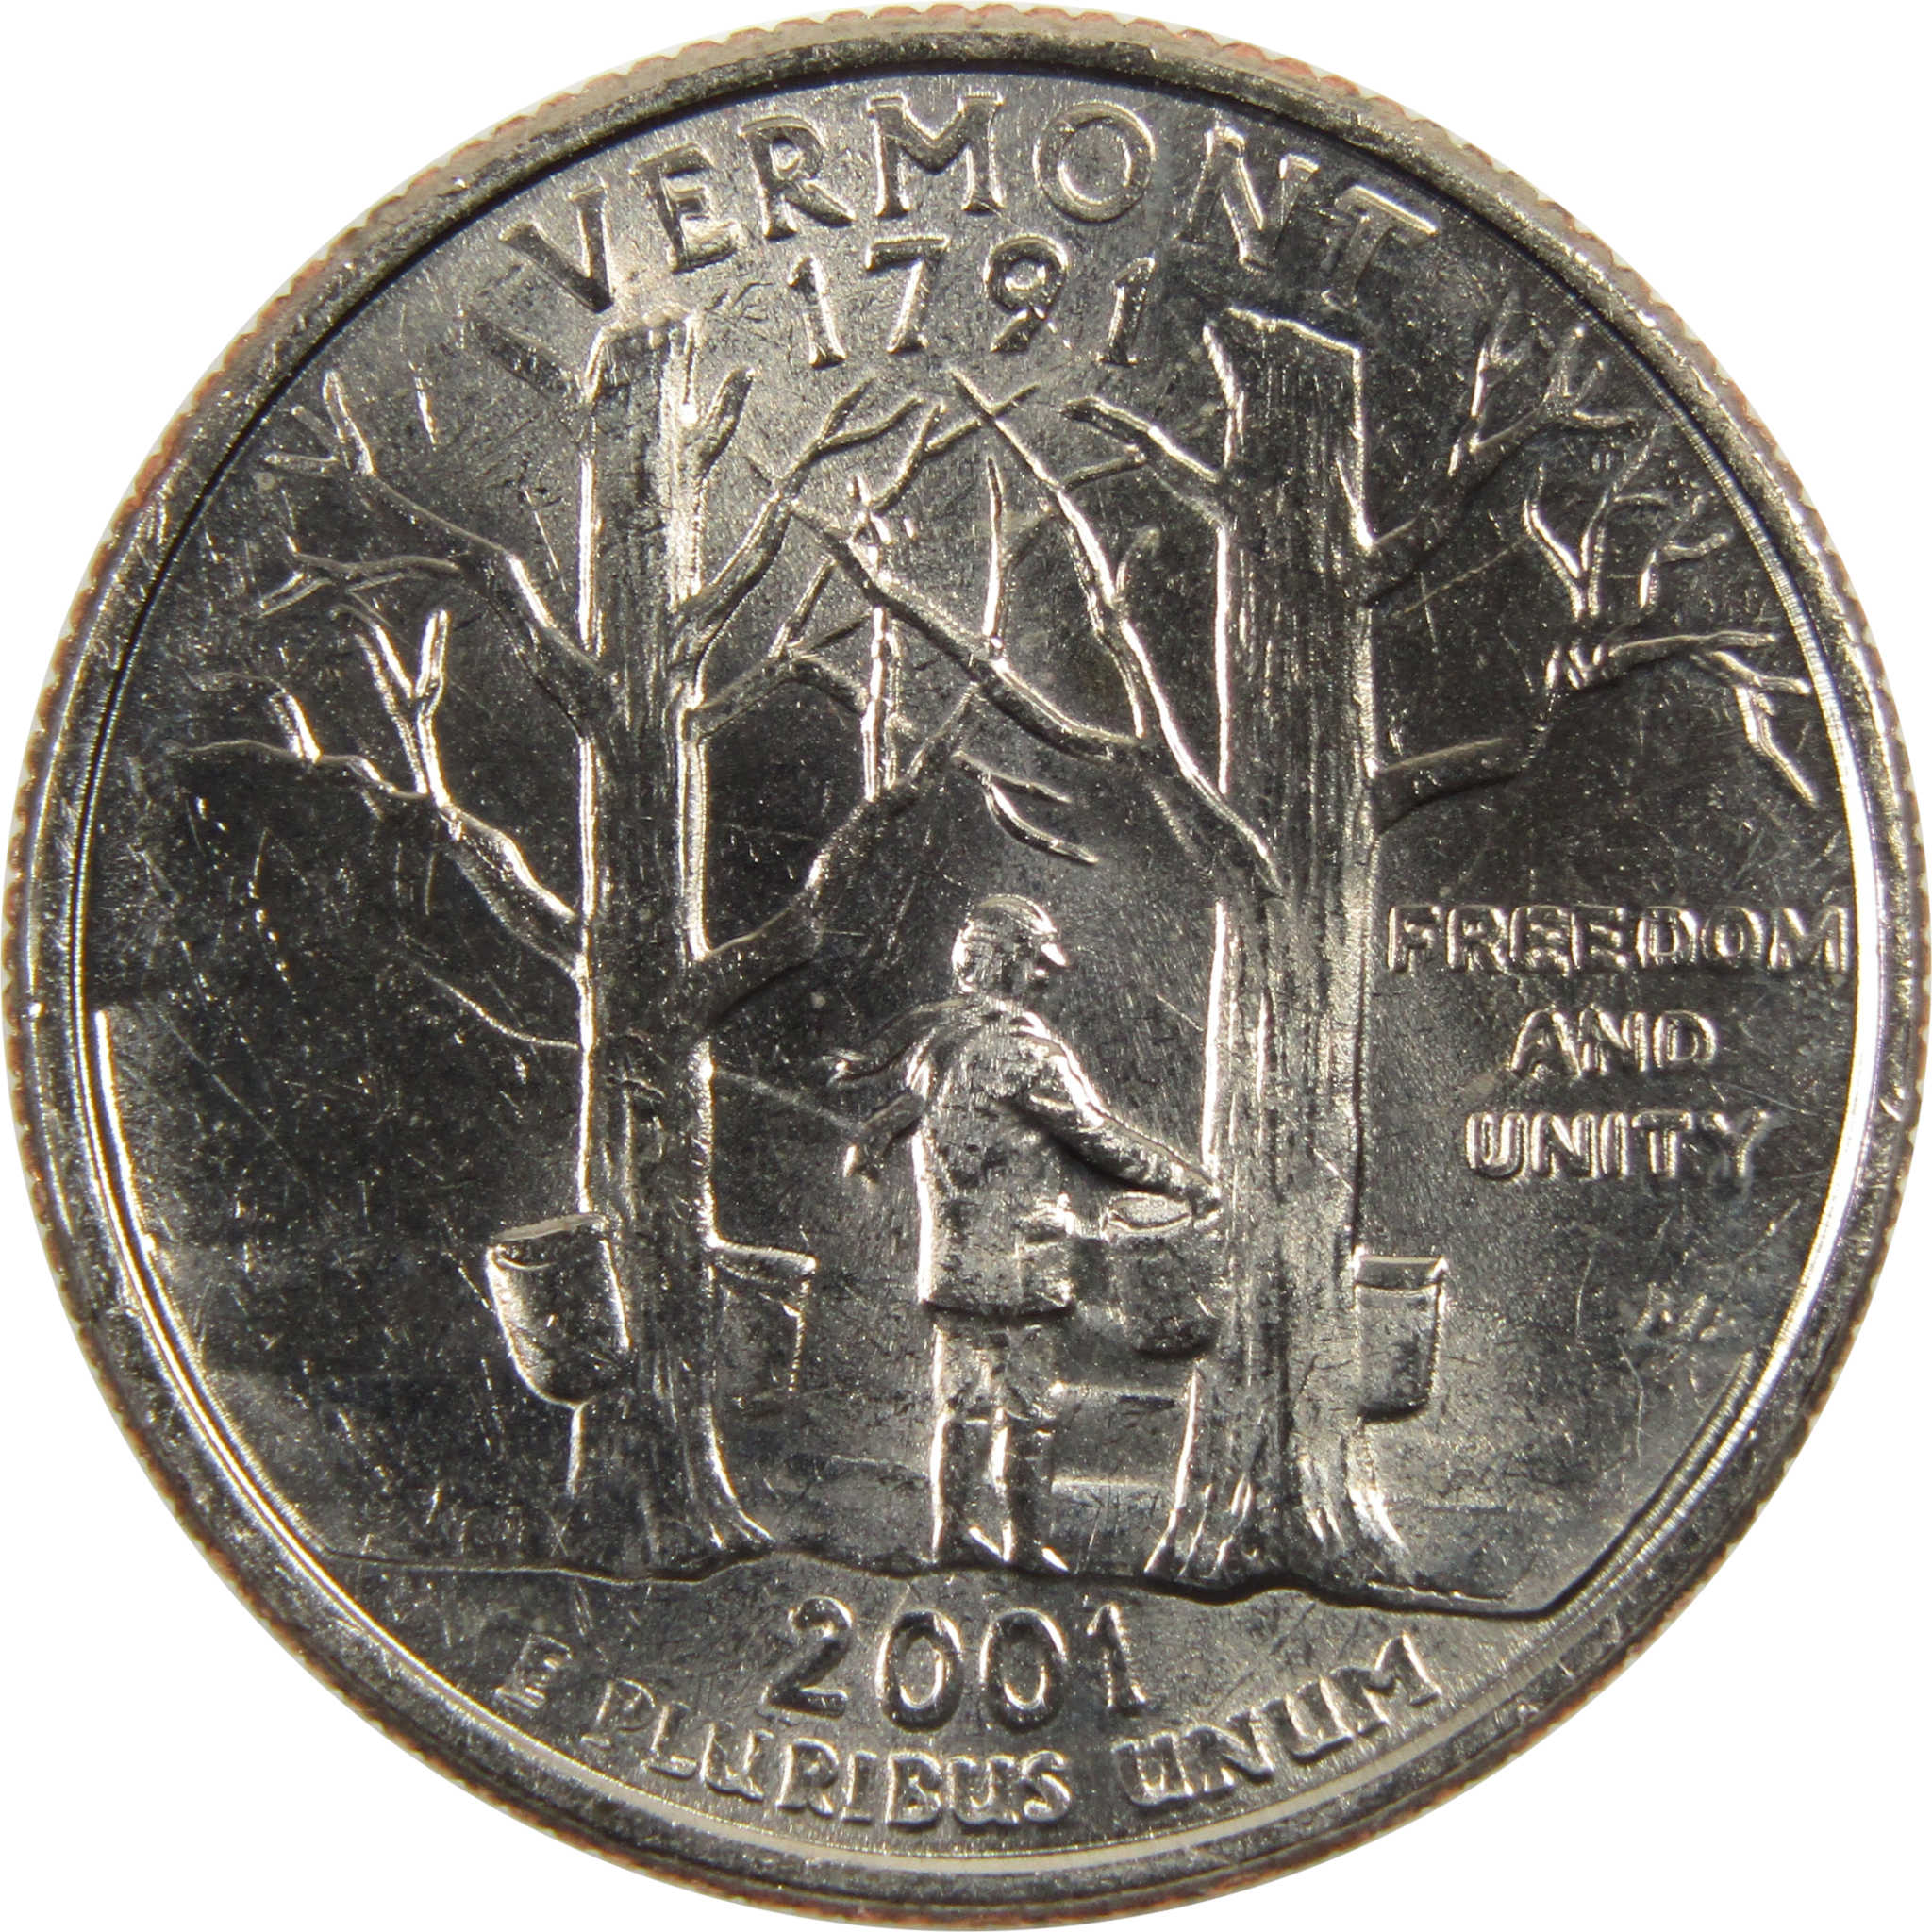 2001 P Vermont State Quarter BU Uncirculated Clad 25c Coin